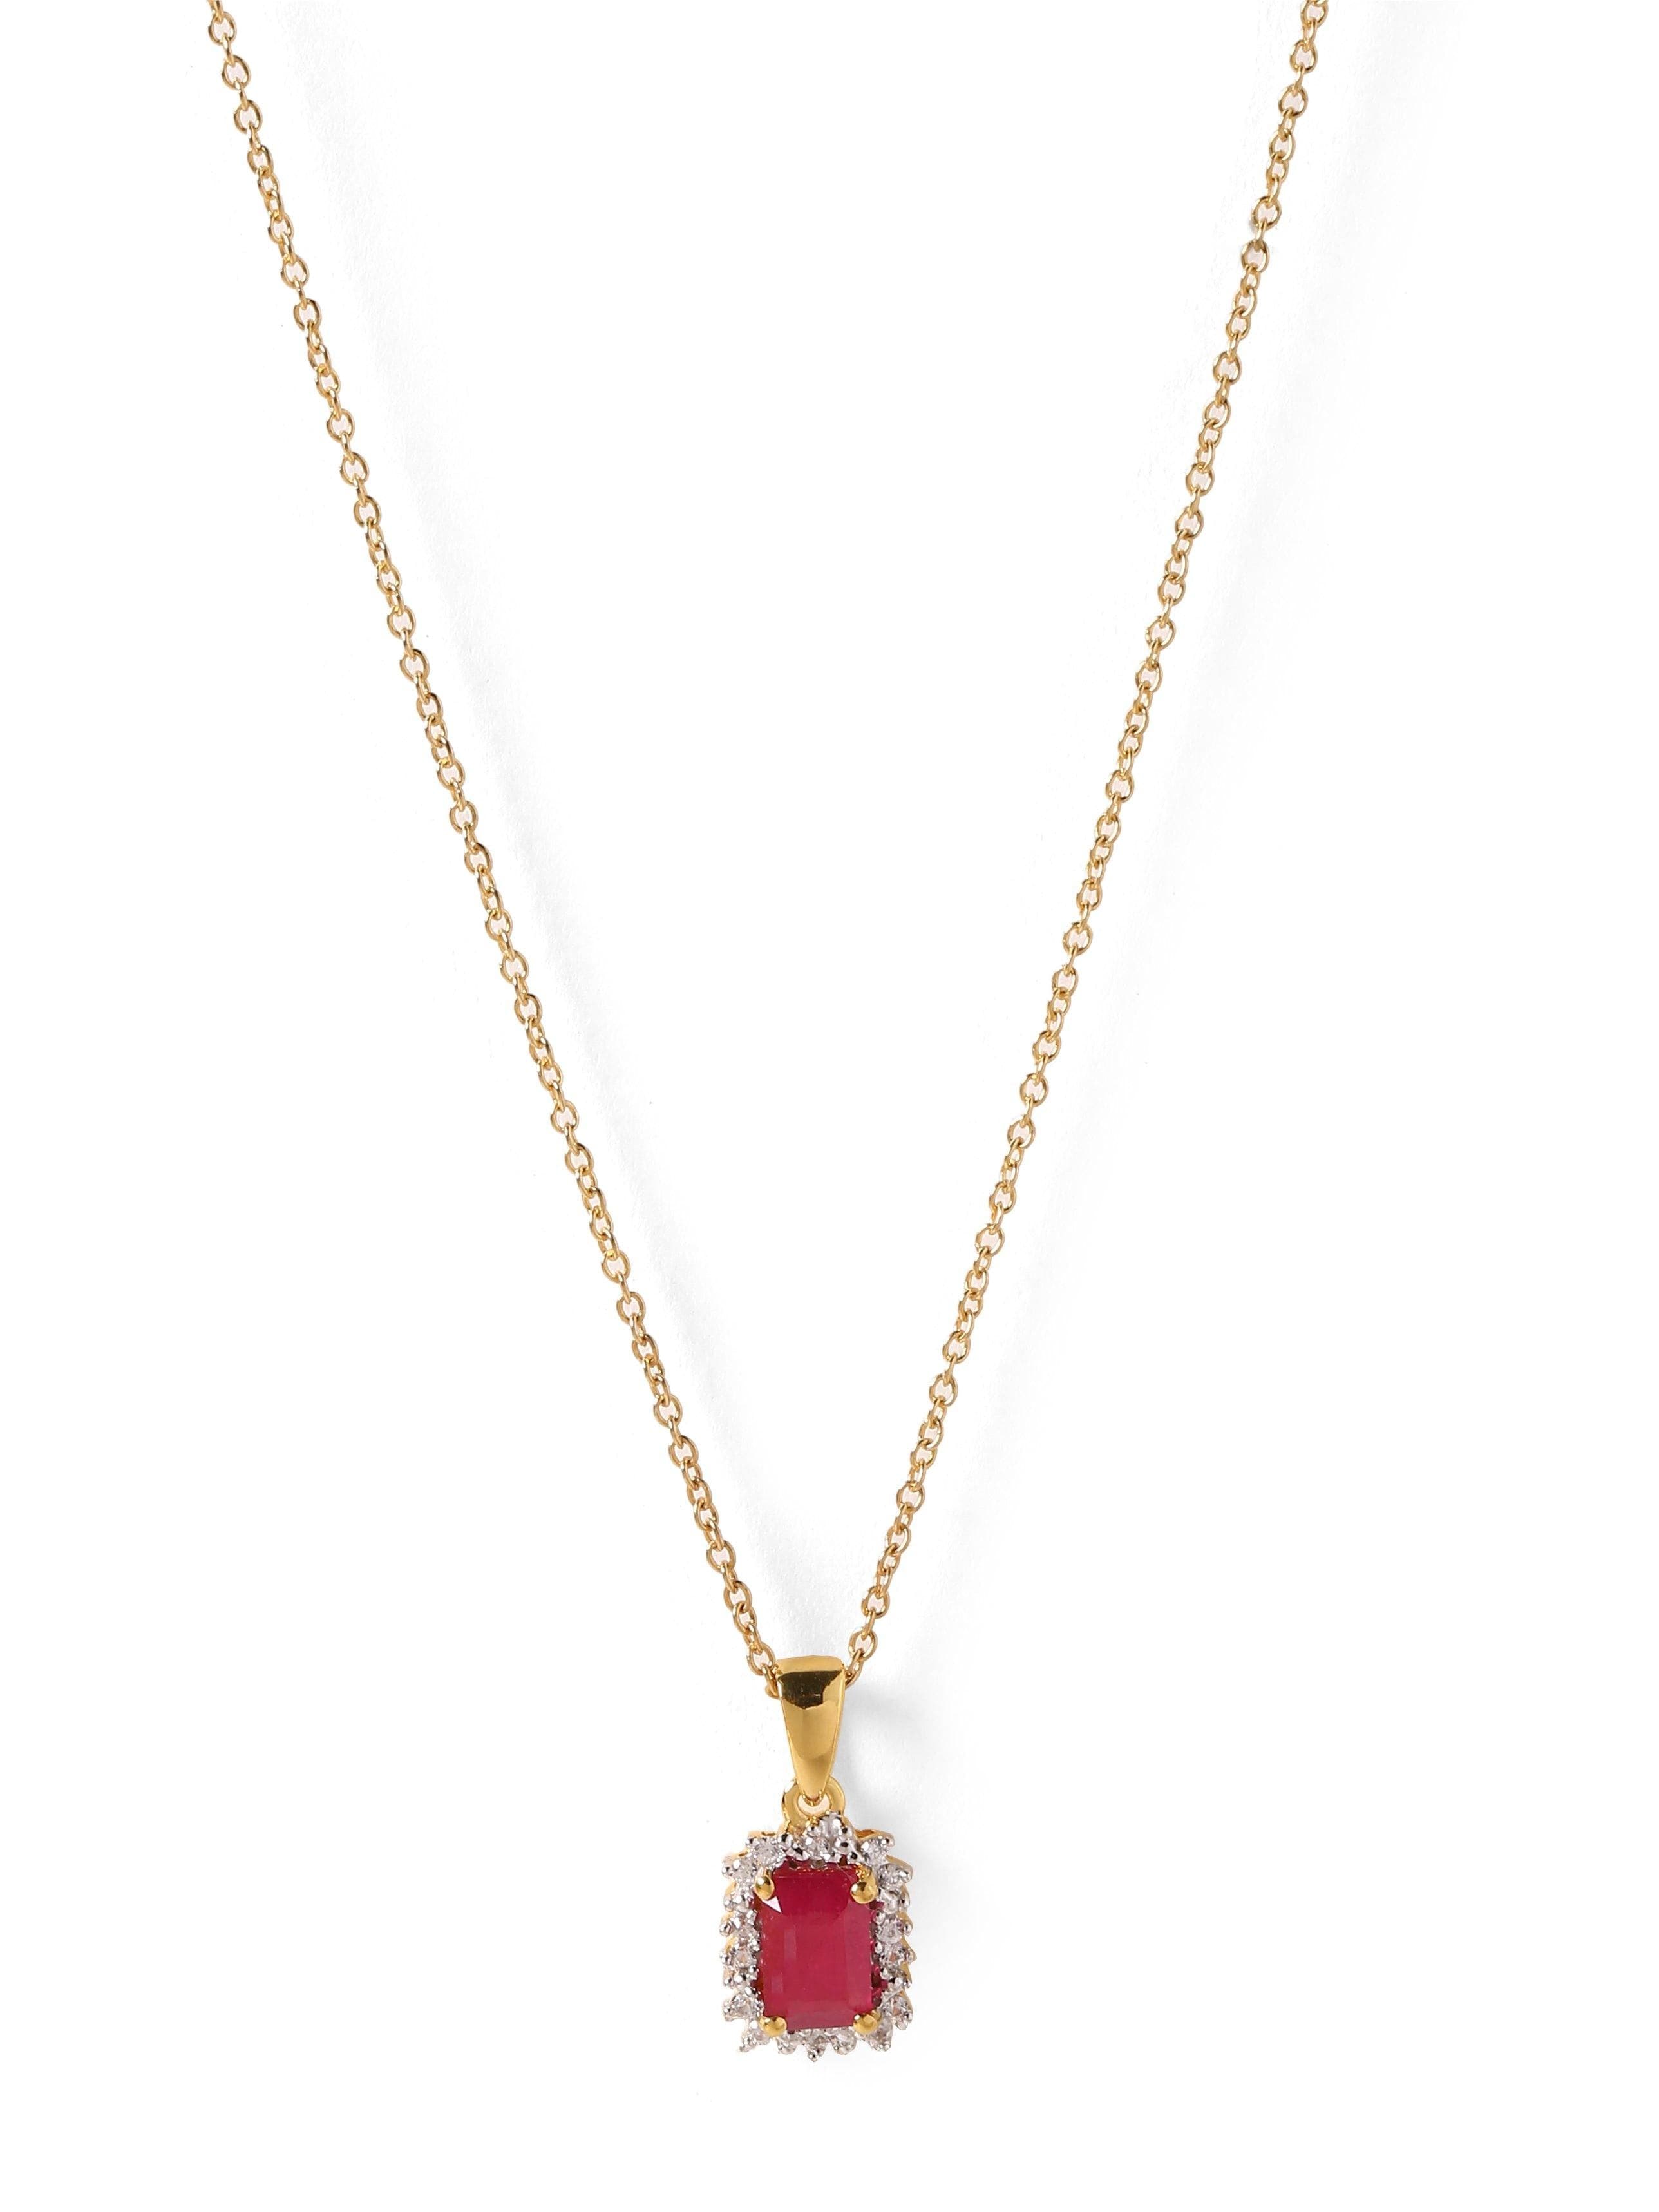 0.73 Ct. Glass Filled Ruby Solid 10k Yellow Gold Chain Pendant Necklace Jewelry - YoTreasure